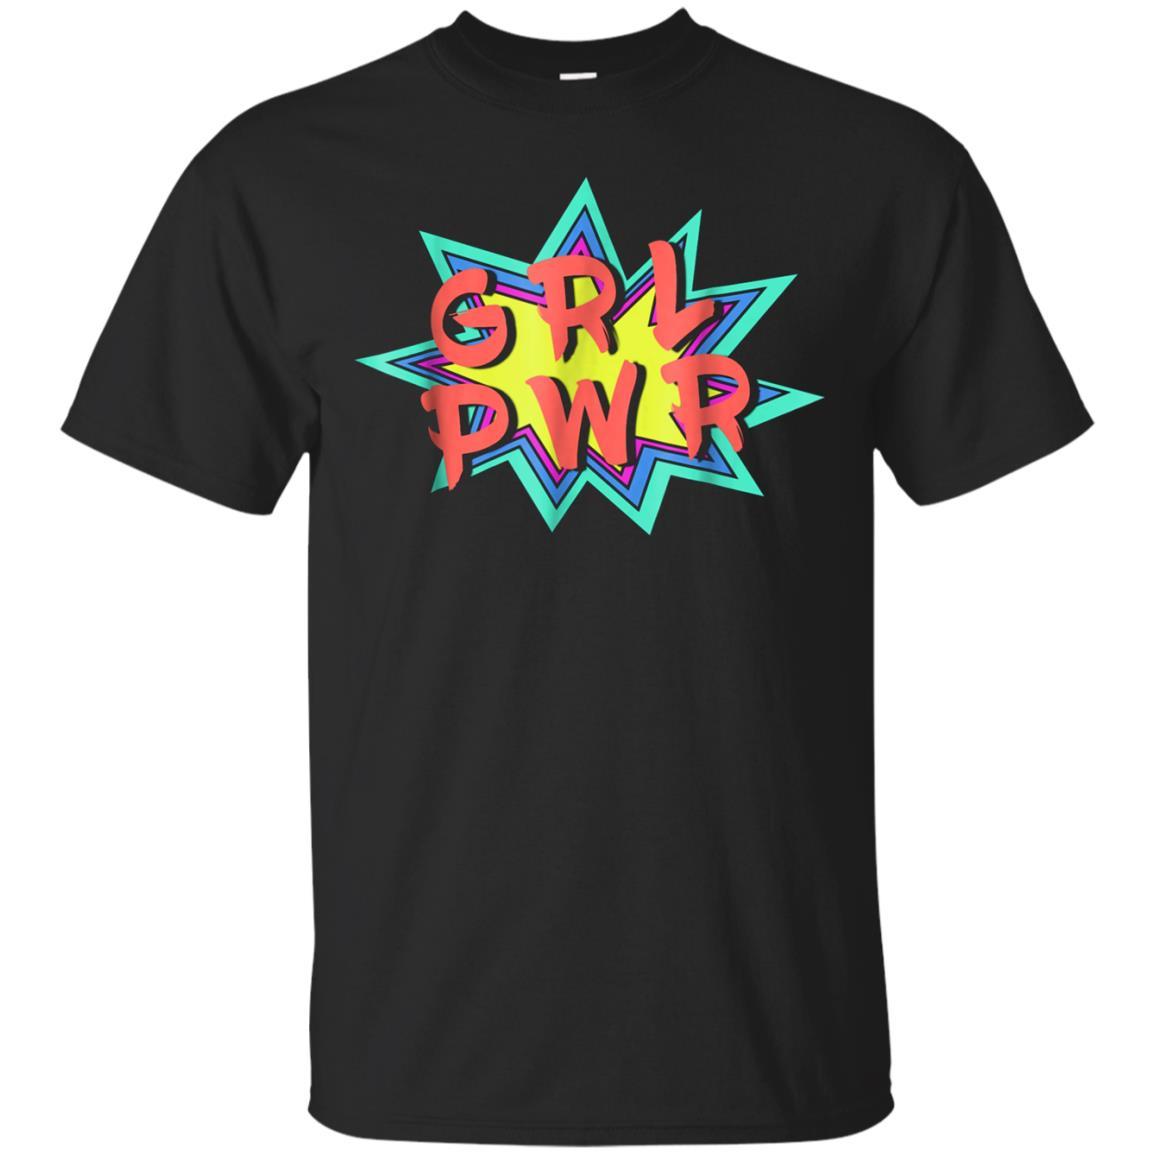 Grl Pwr Girl Power T-shirt Comic Book Feminist Equality Top